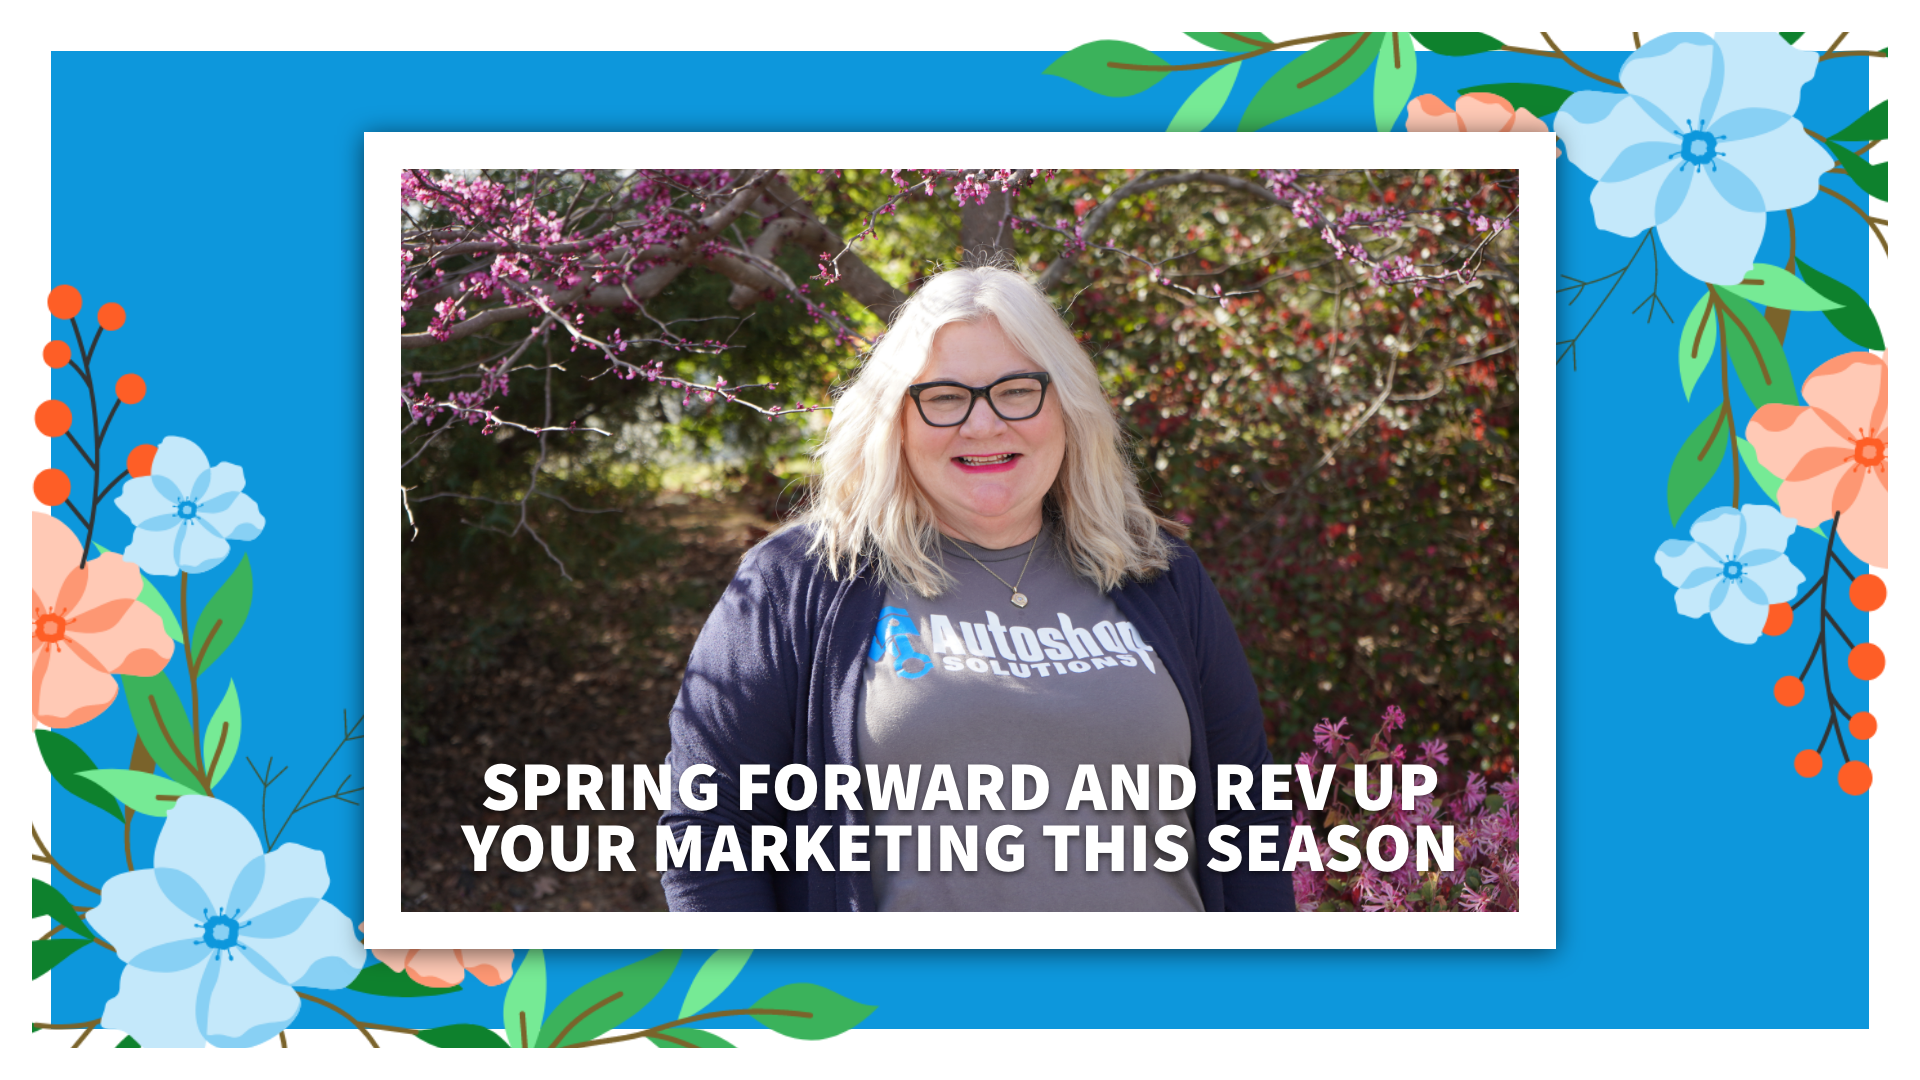 Spring Forward and Rev Up Your Marketing this Season